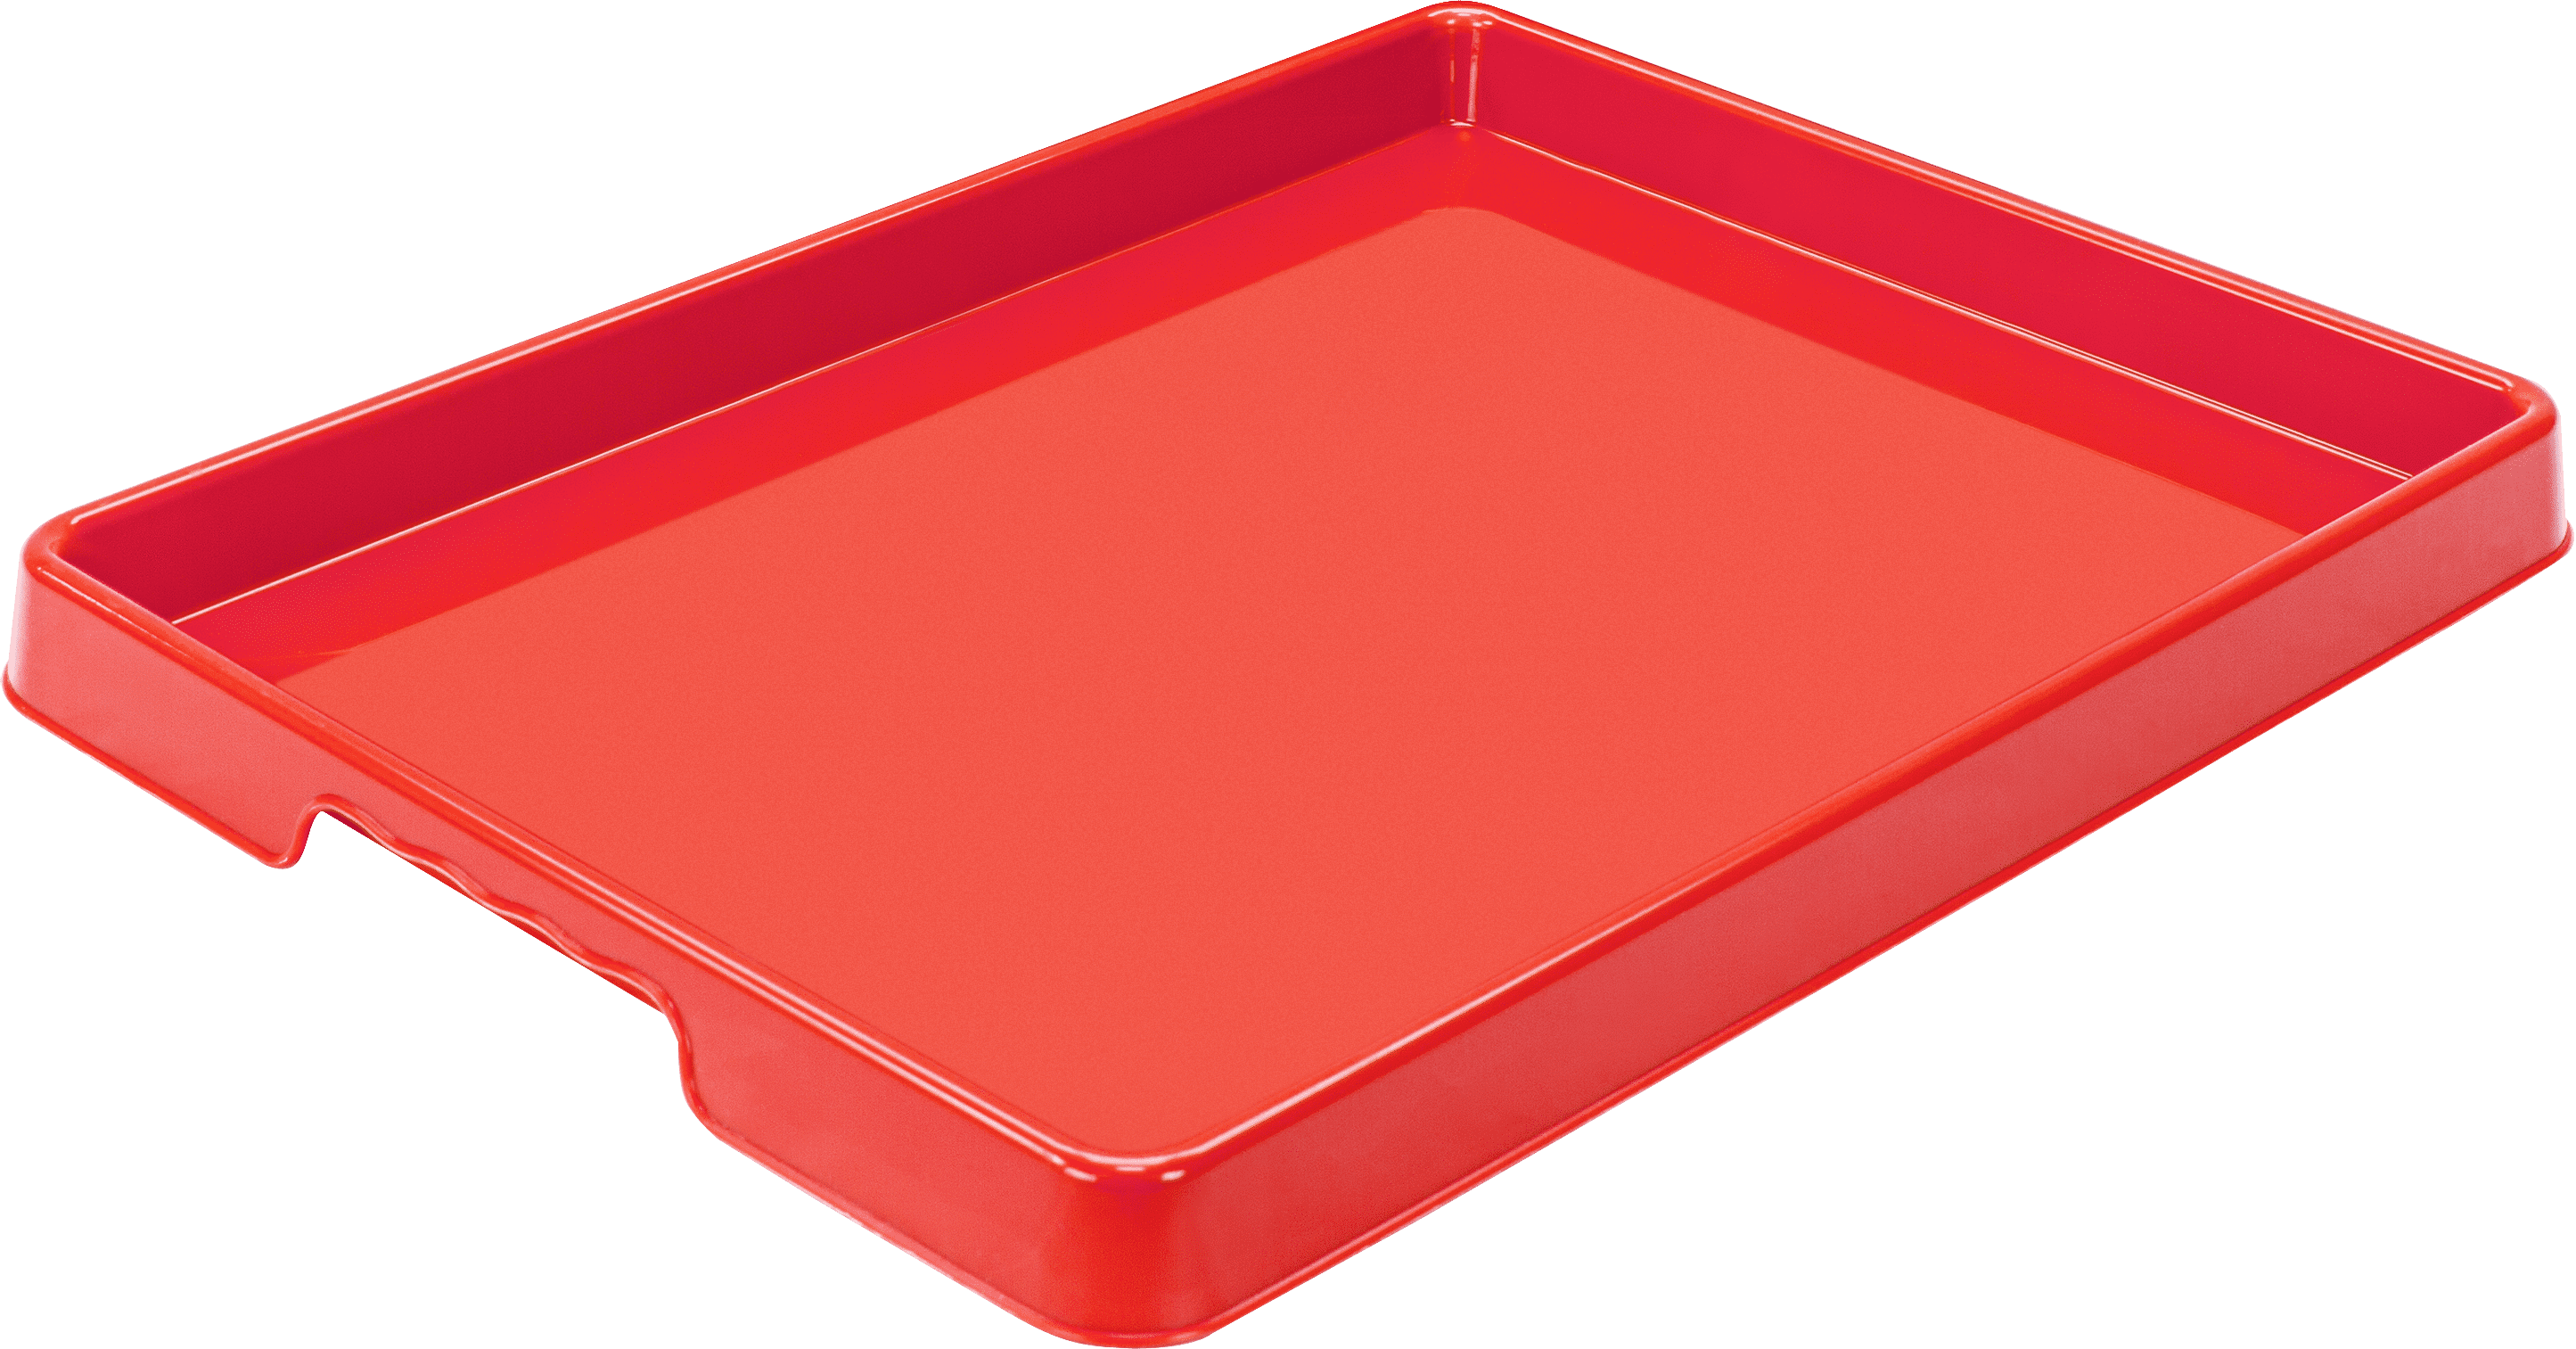 Storex Sorting and Crafts Tray, 12x16 Inches, Assorted Colors, Set